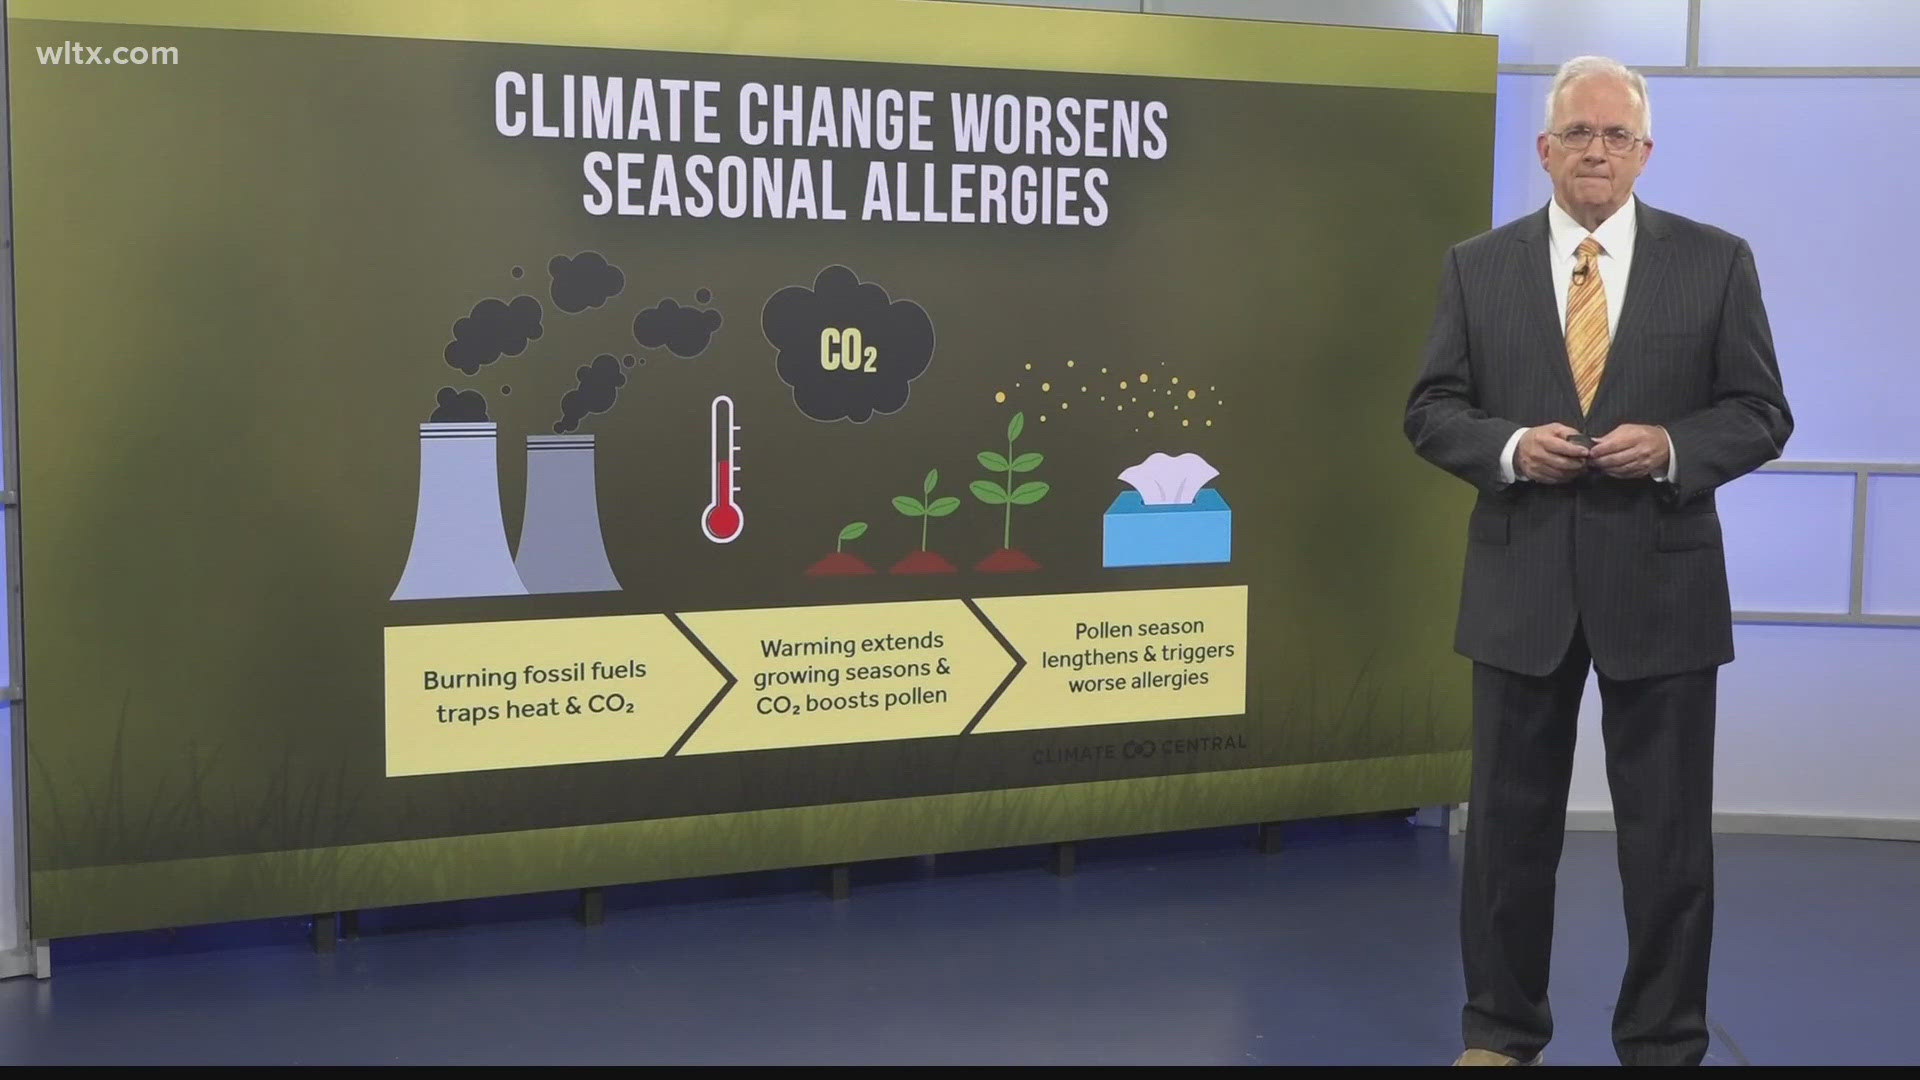 If you've wondered about the pollen in South Carolina, Jim Gandy will explain the "pollen season".